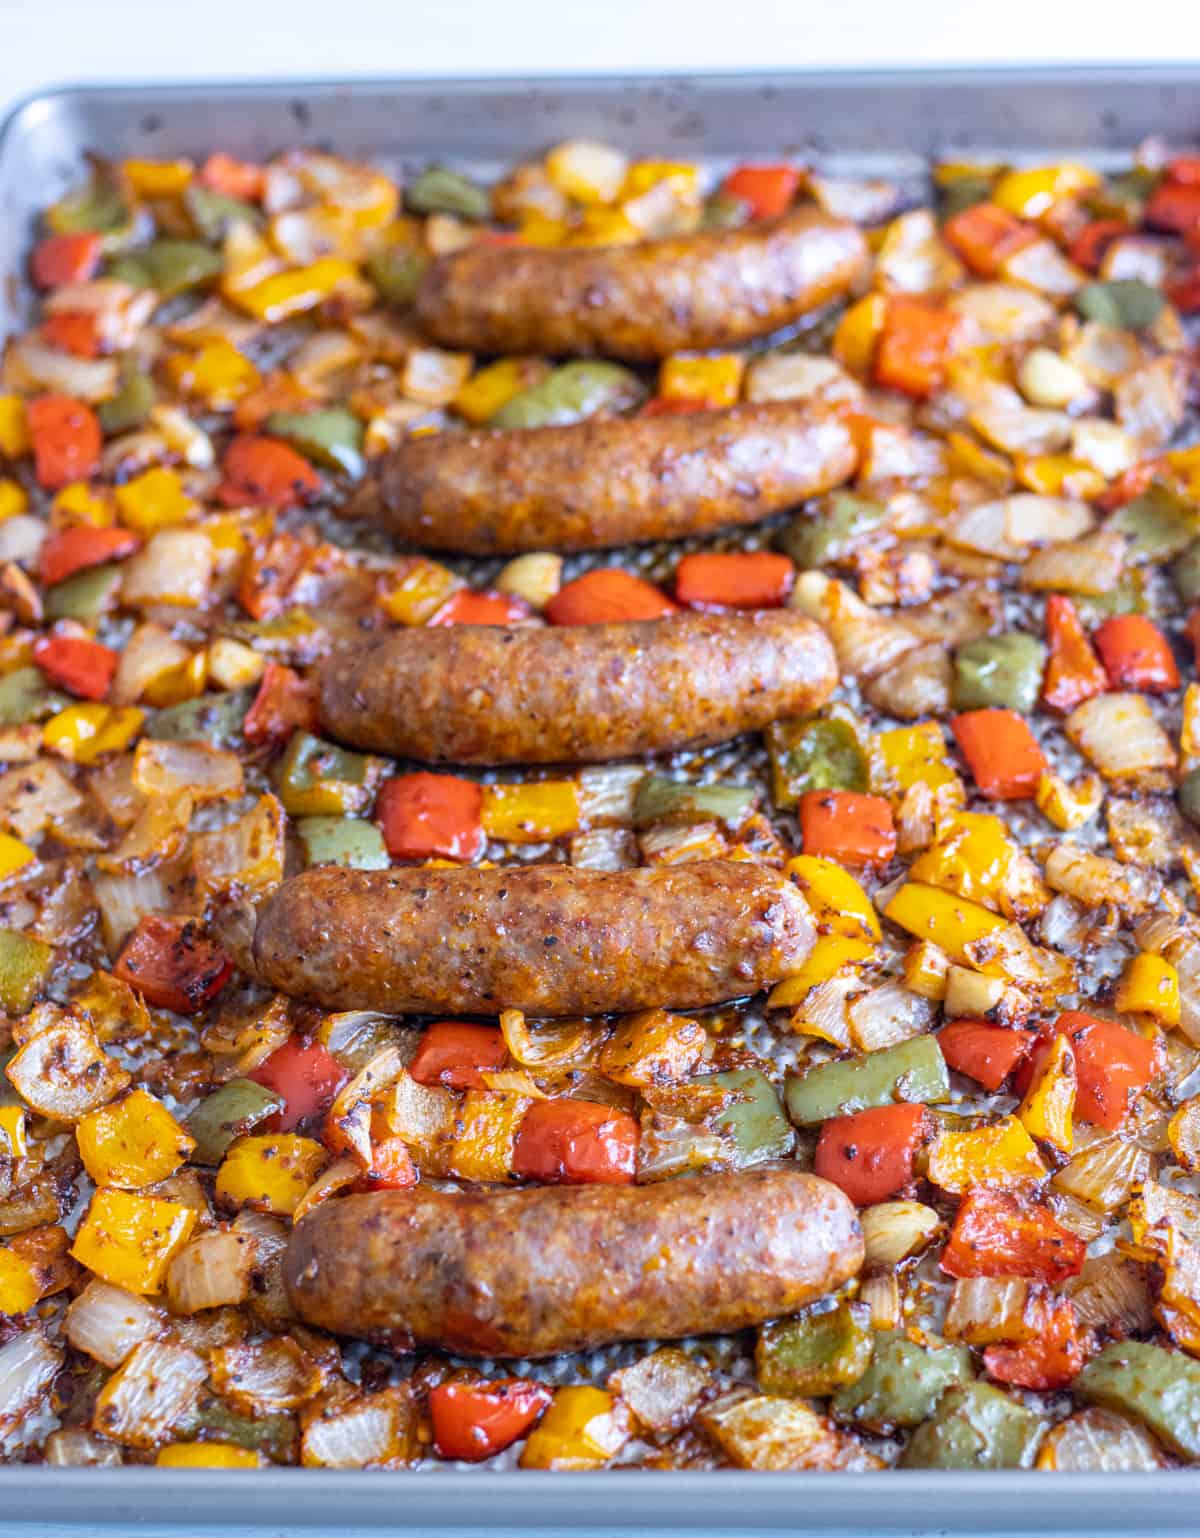 Italian sausages, peppers, and onions roasted on a sheet pan.